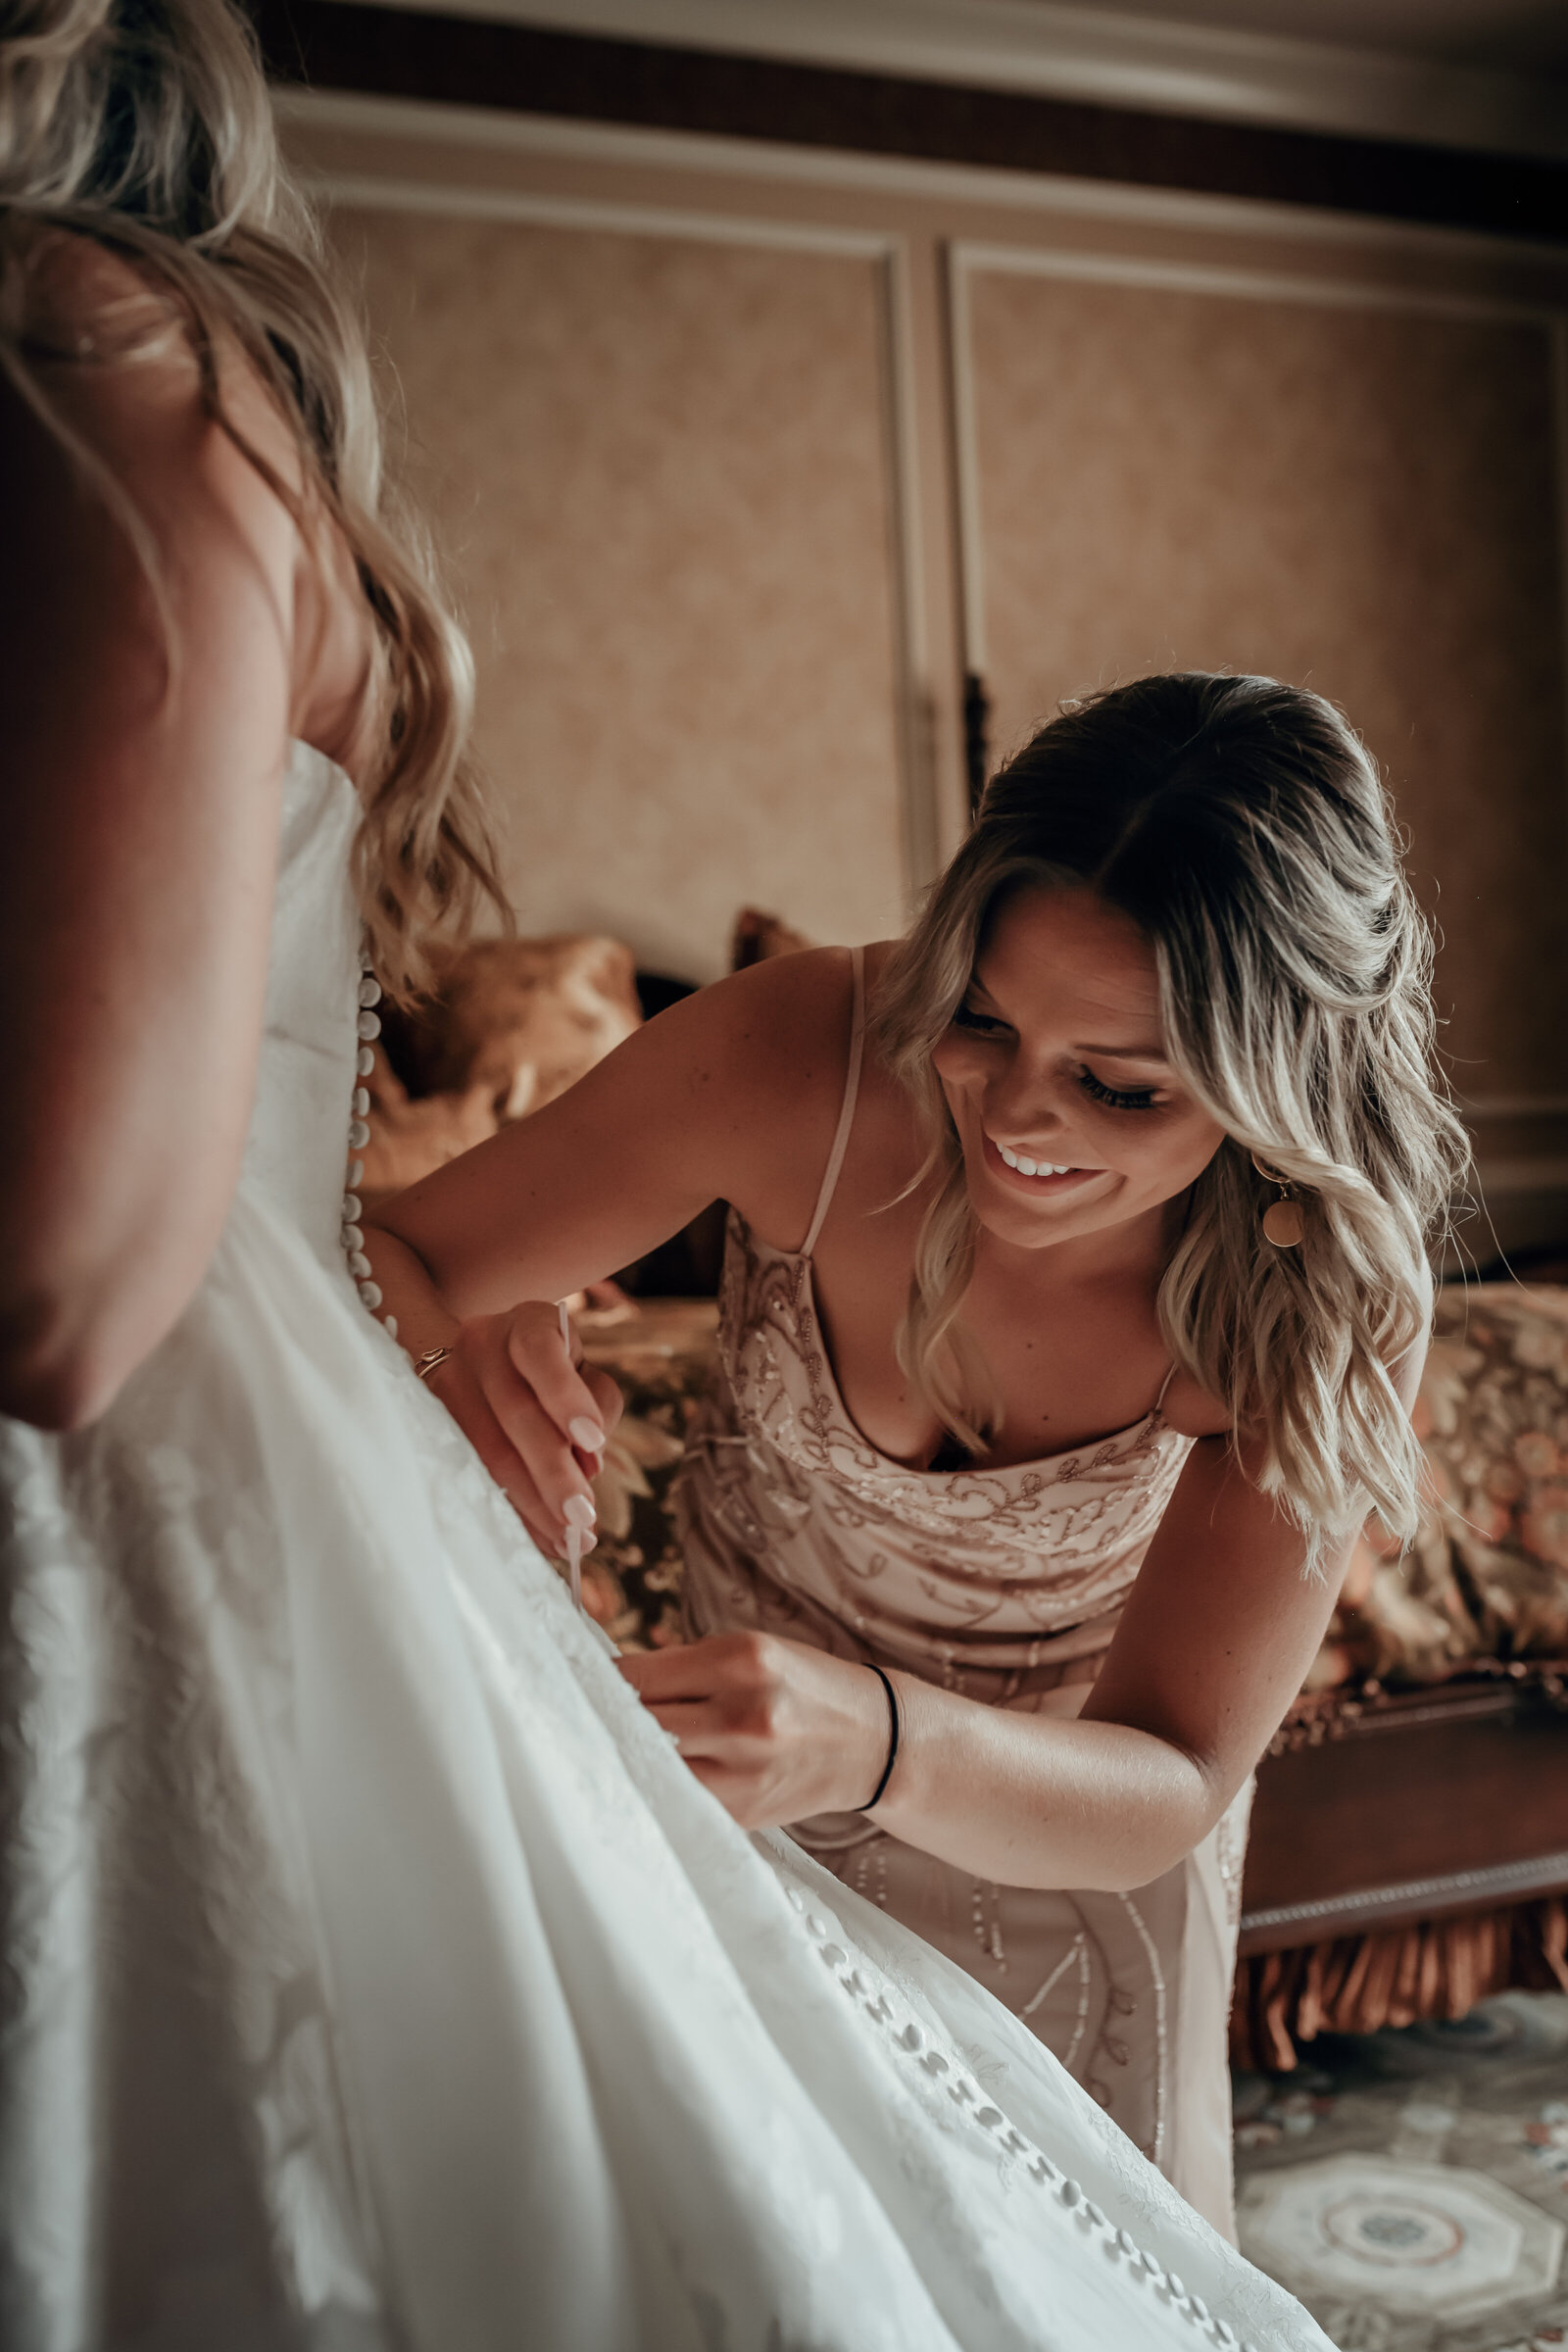 An intimate wedding with a bridesmaid helping the bride get into her wedding dress